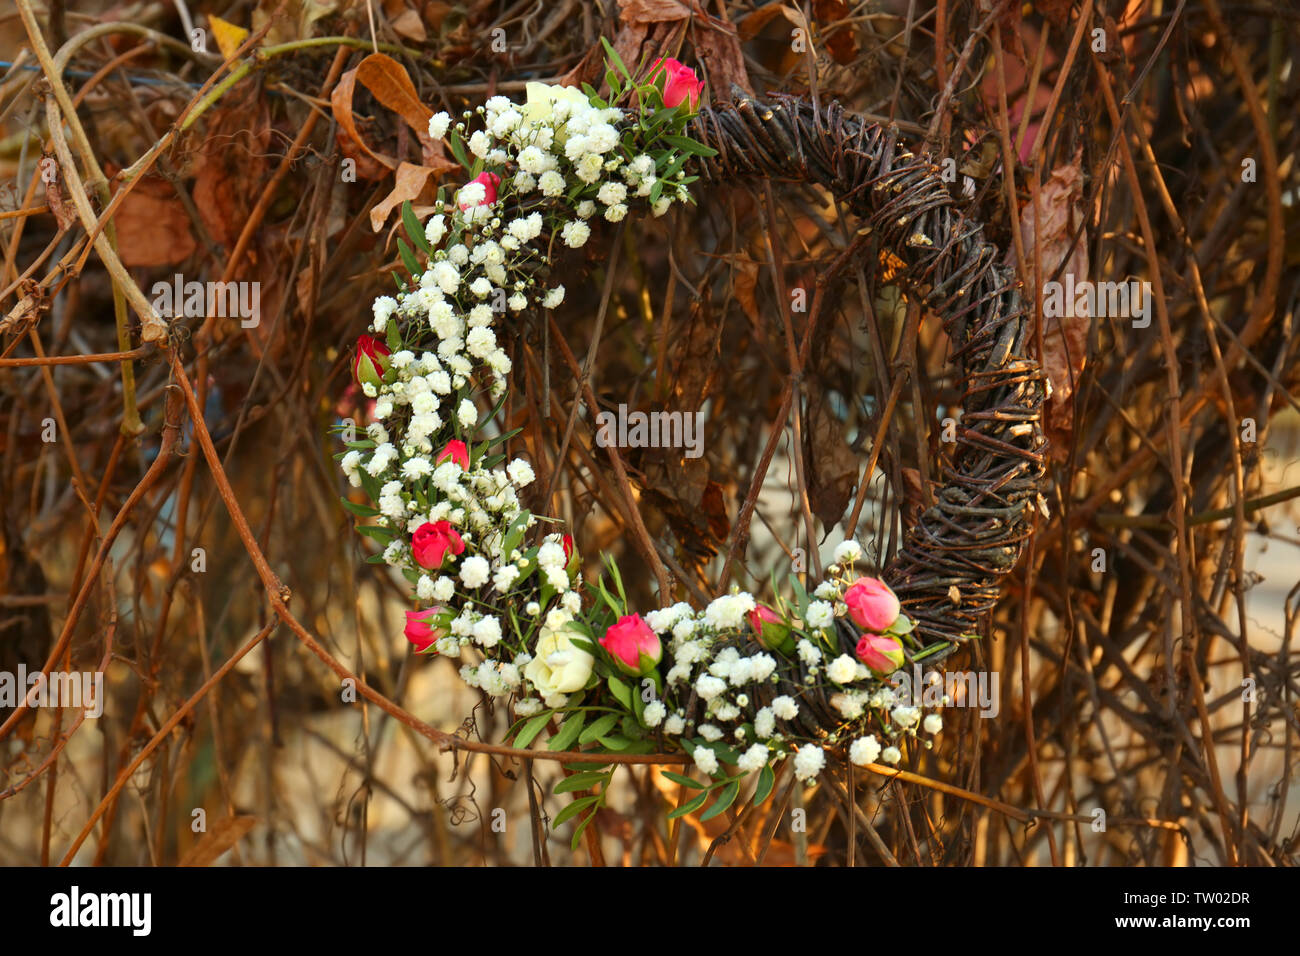 Floral wreath with beautiful flowers on grapevine background Stock Photo